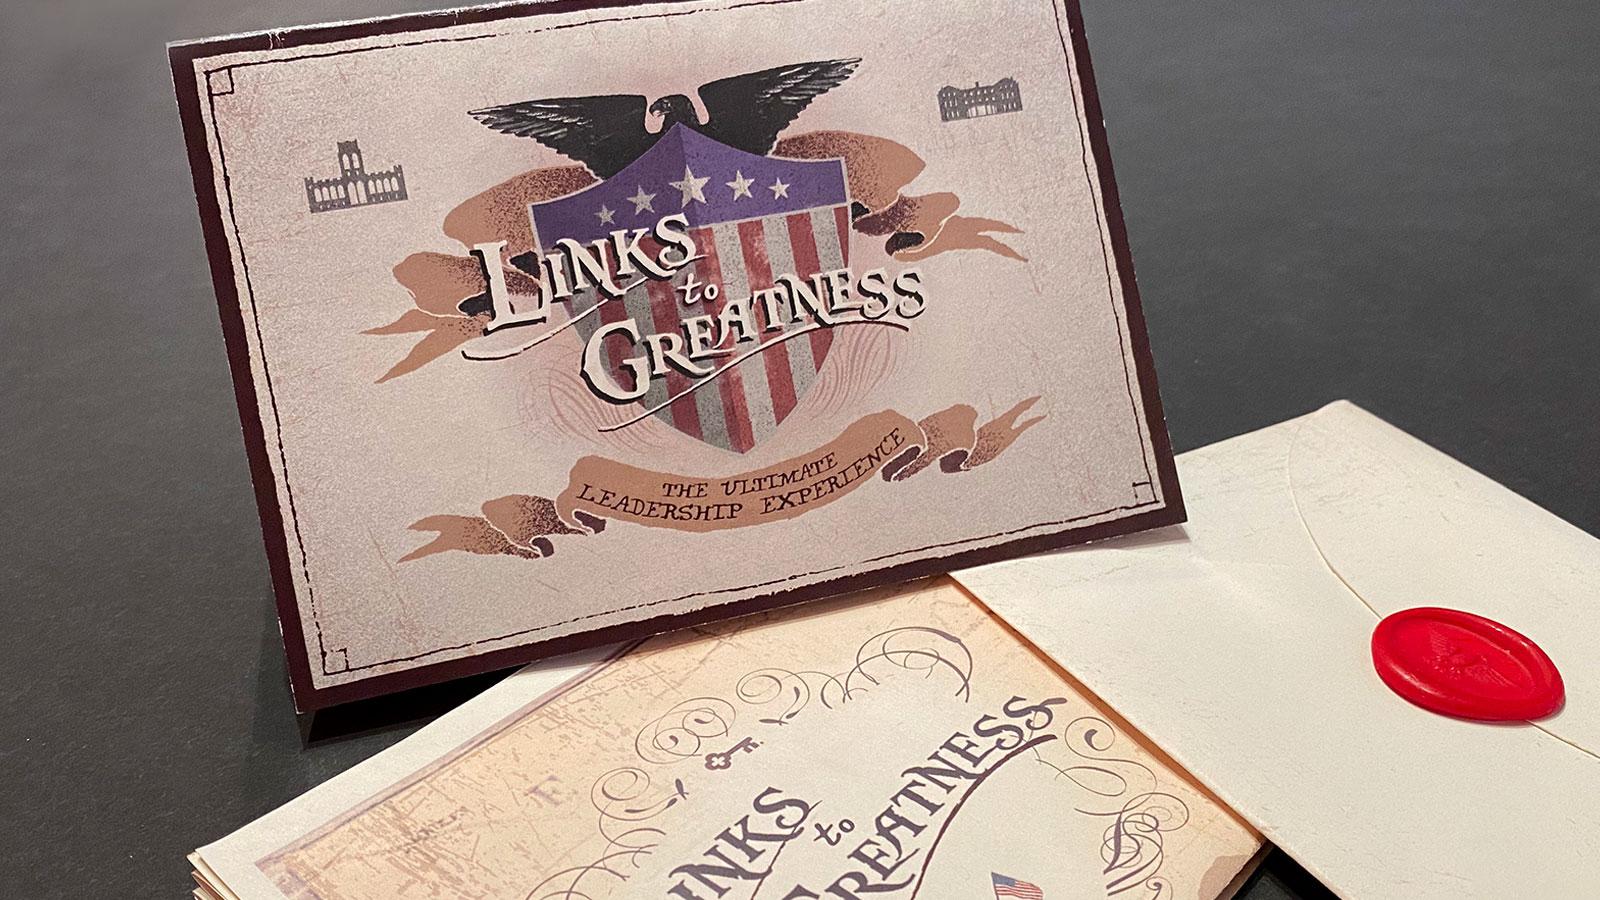 Keybank | Links to Greatness Invite